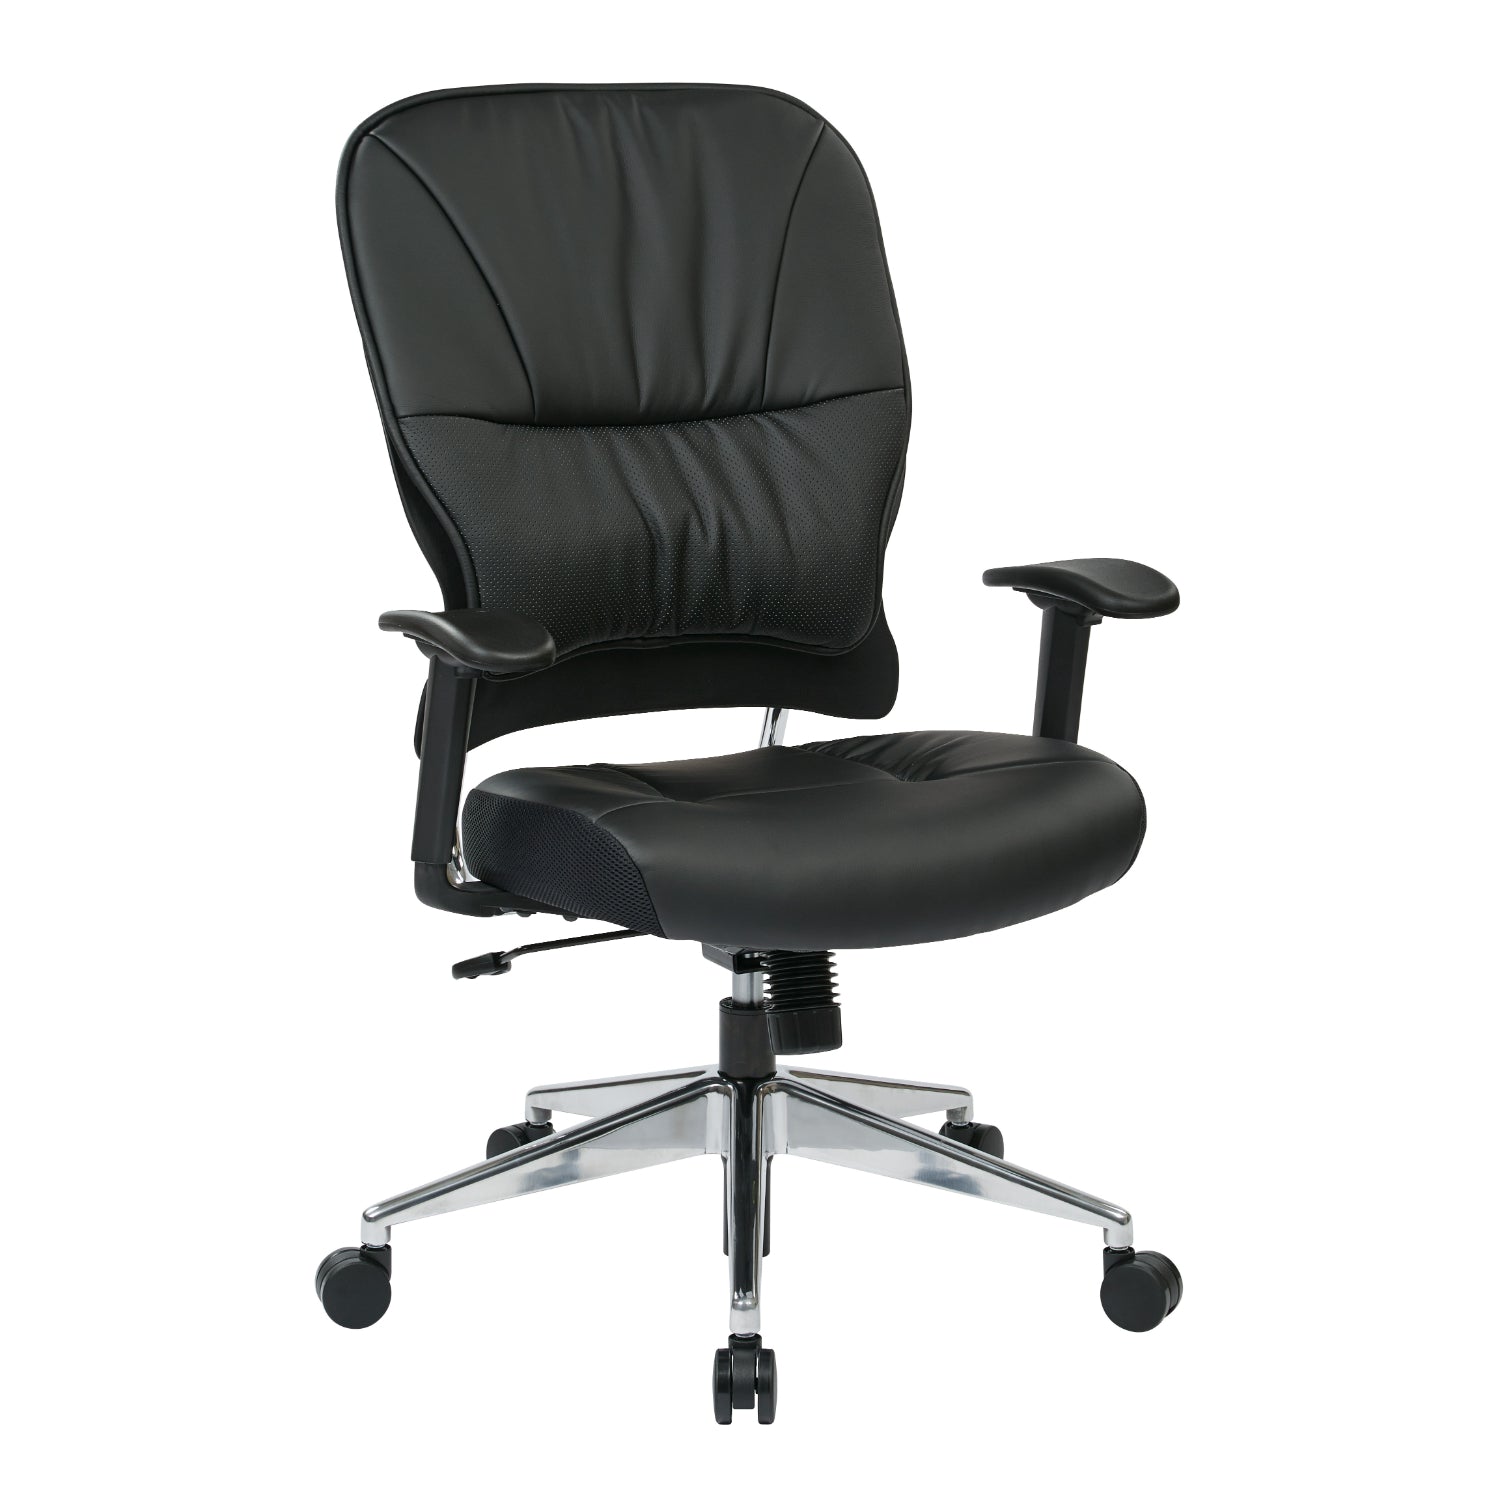 Black Bonded Leather Seat and Back Manager's Chair with Adjustable Arms and Polished Aluminum Finish Base